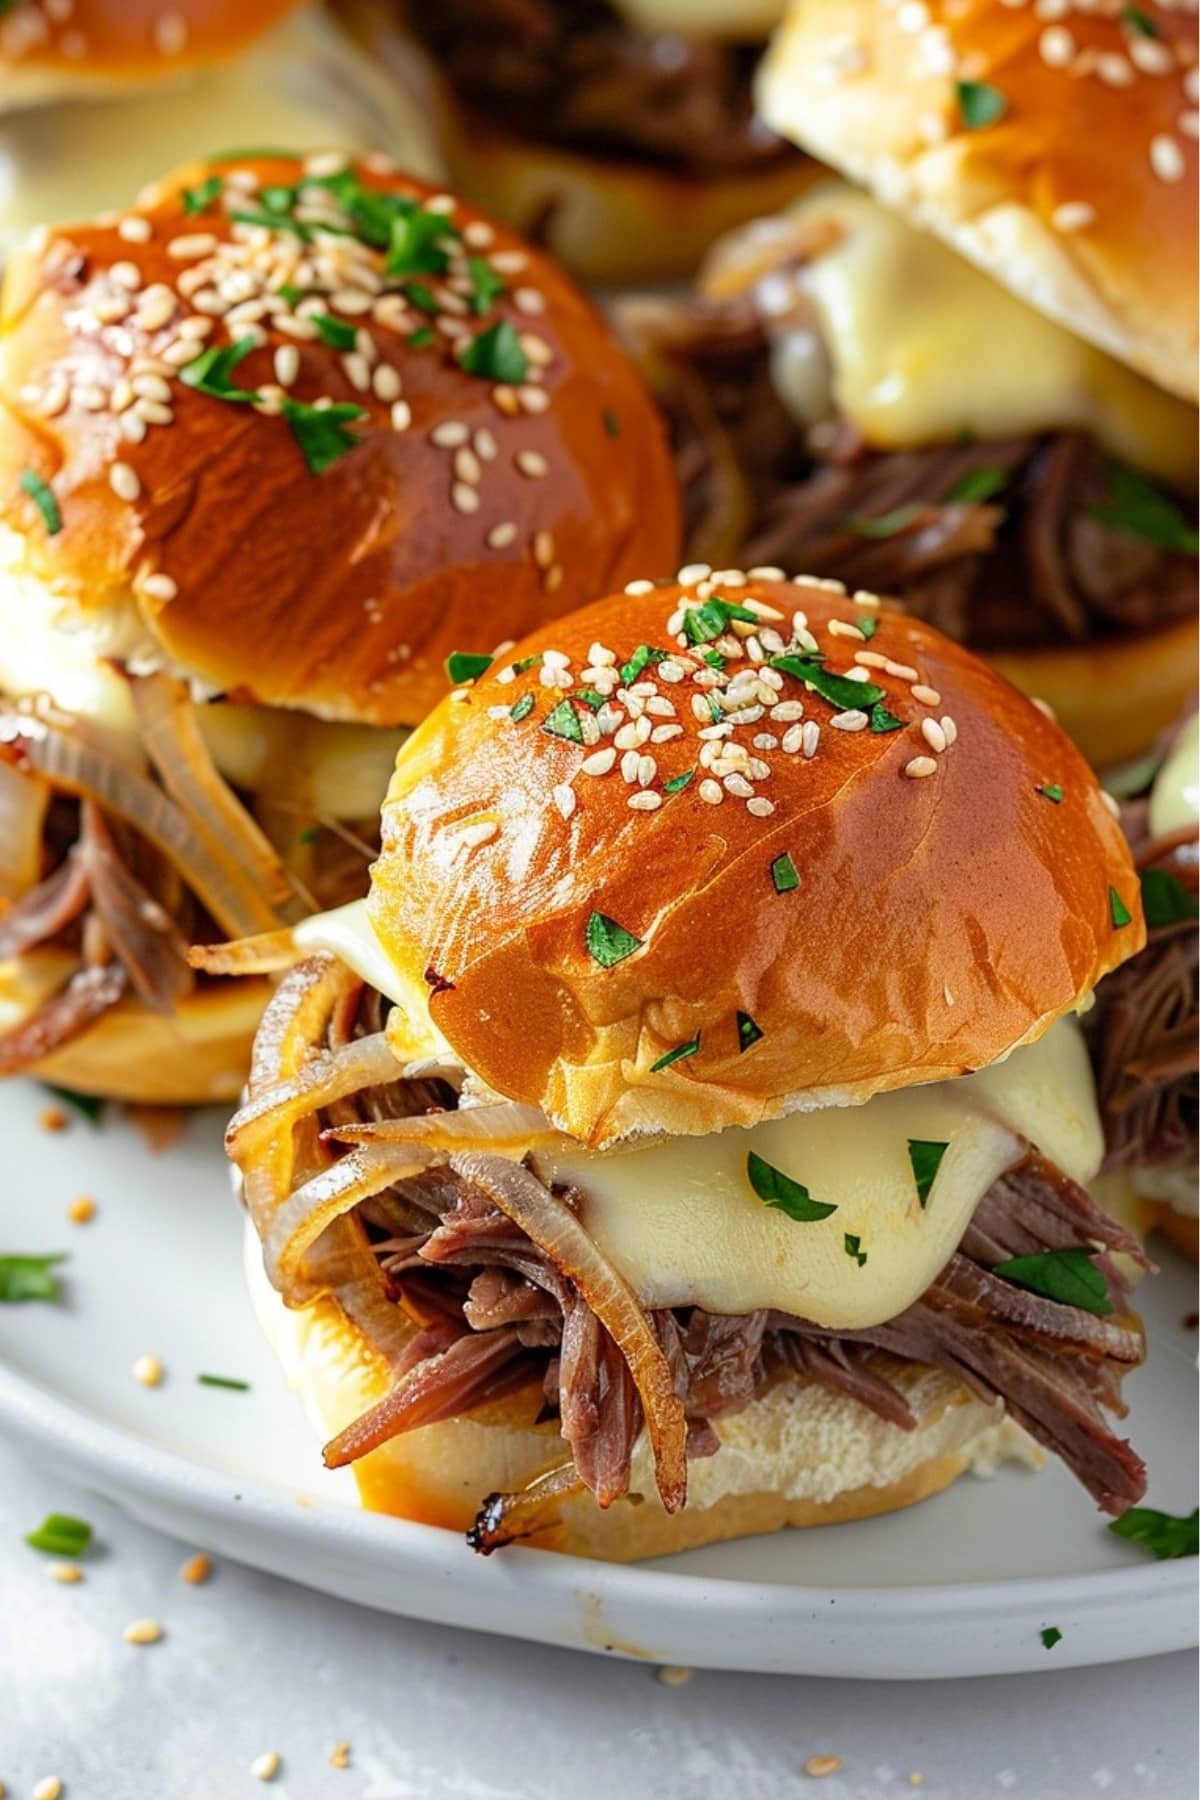 Cheesy French dip sliders on a white plate.